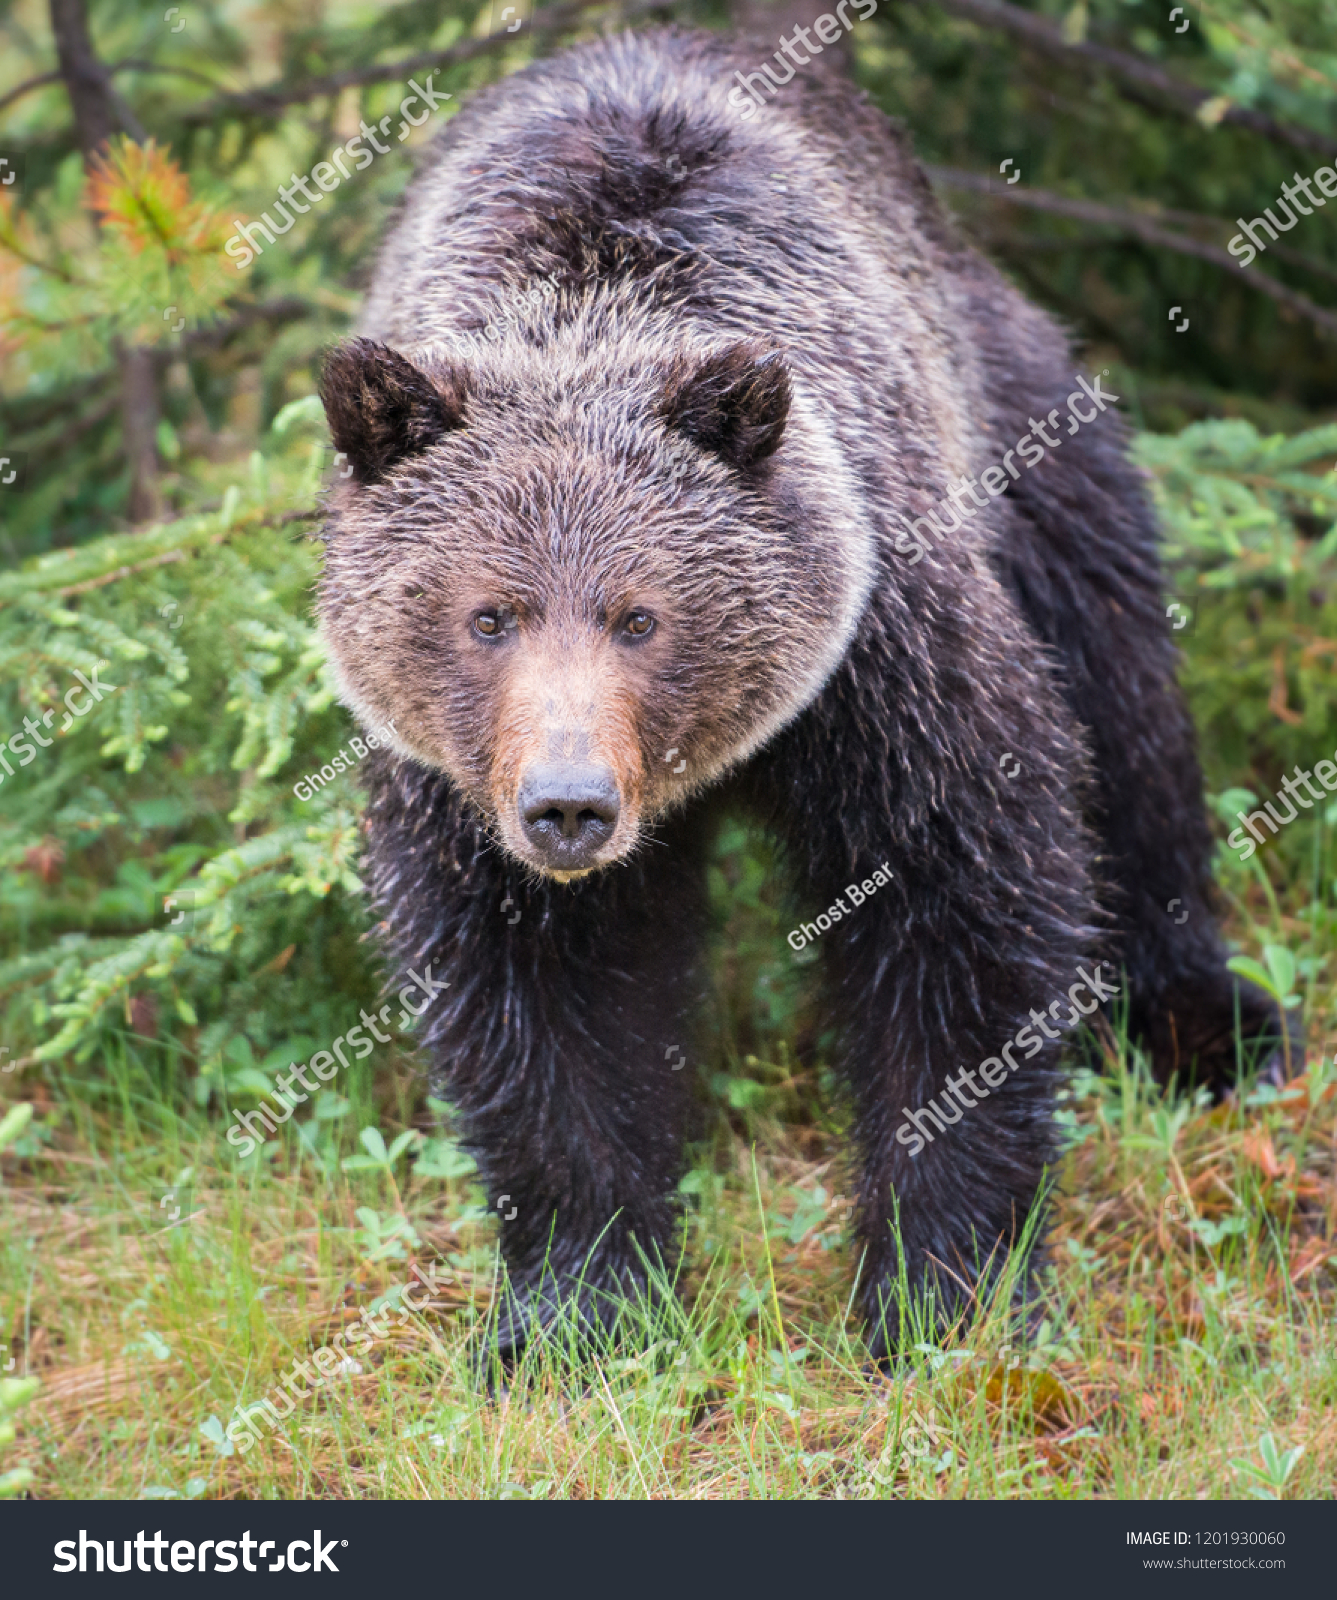 Grizzly bear in the wild #1201930060